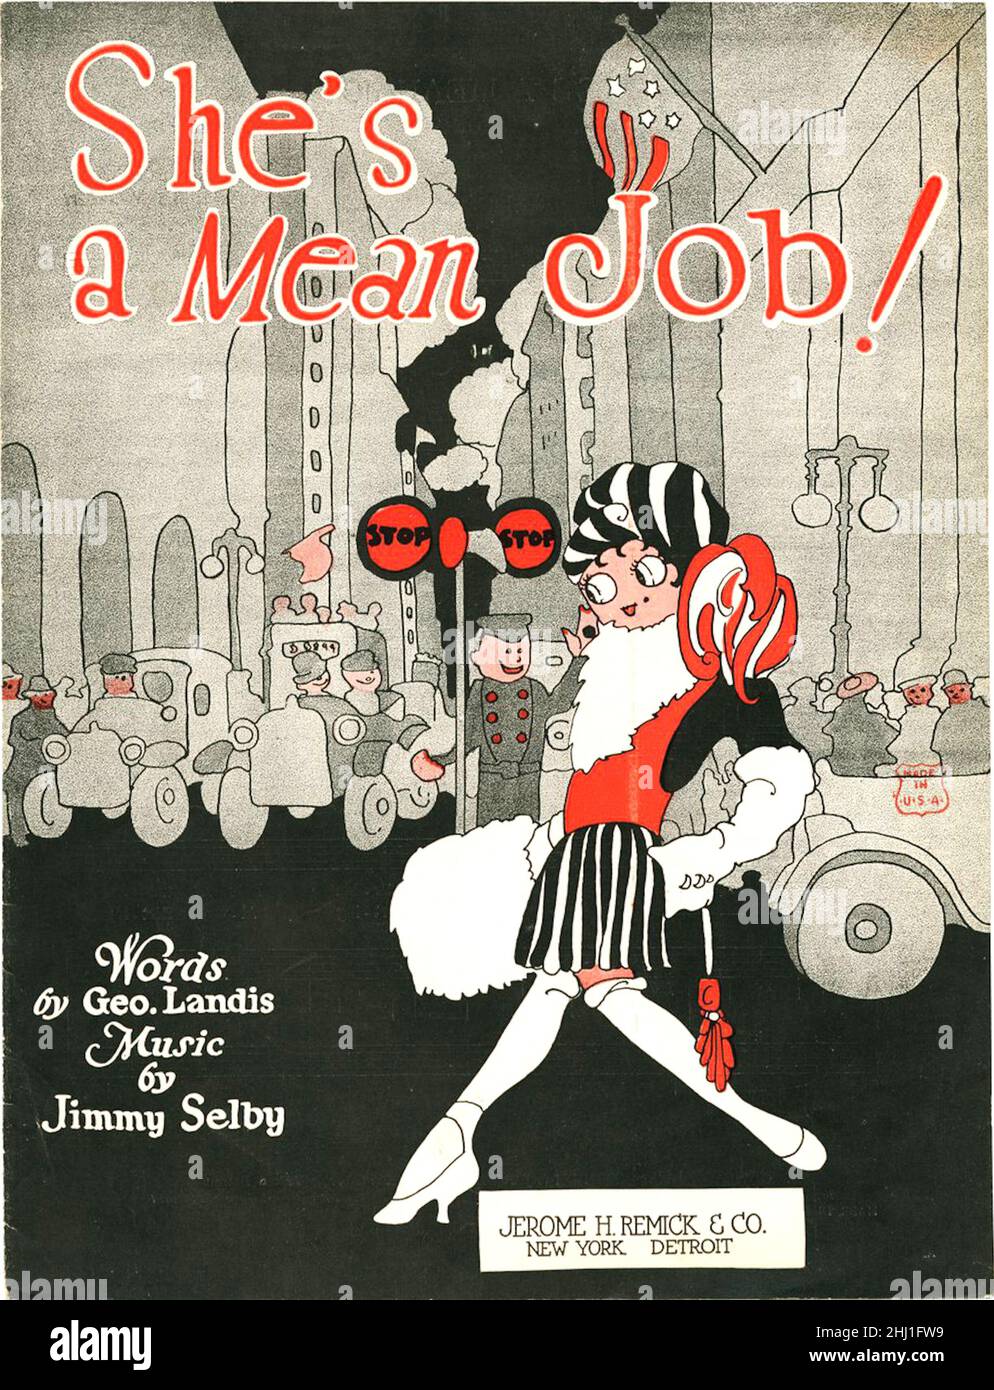 She's a Mean Job - Sheet Music Cover - 1921 Foto Stock